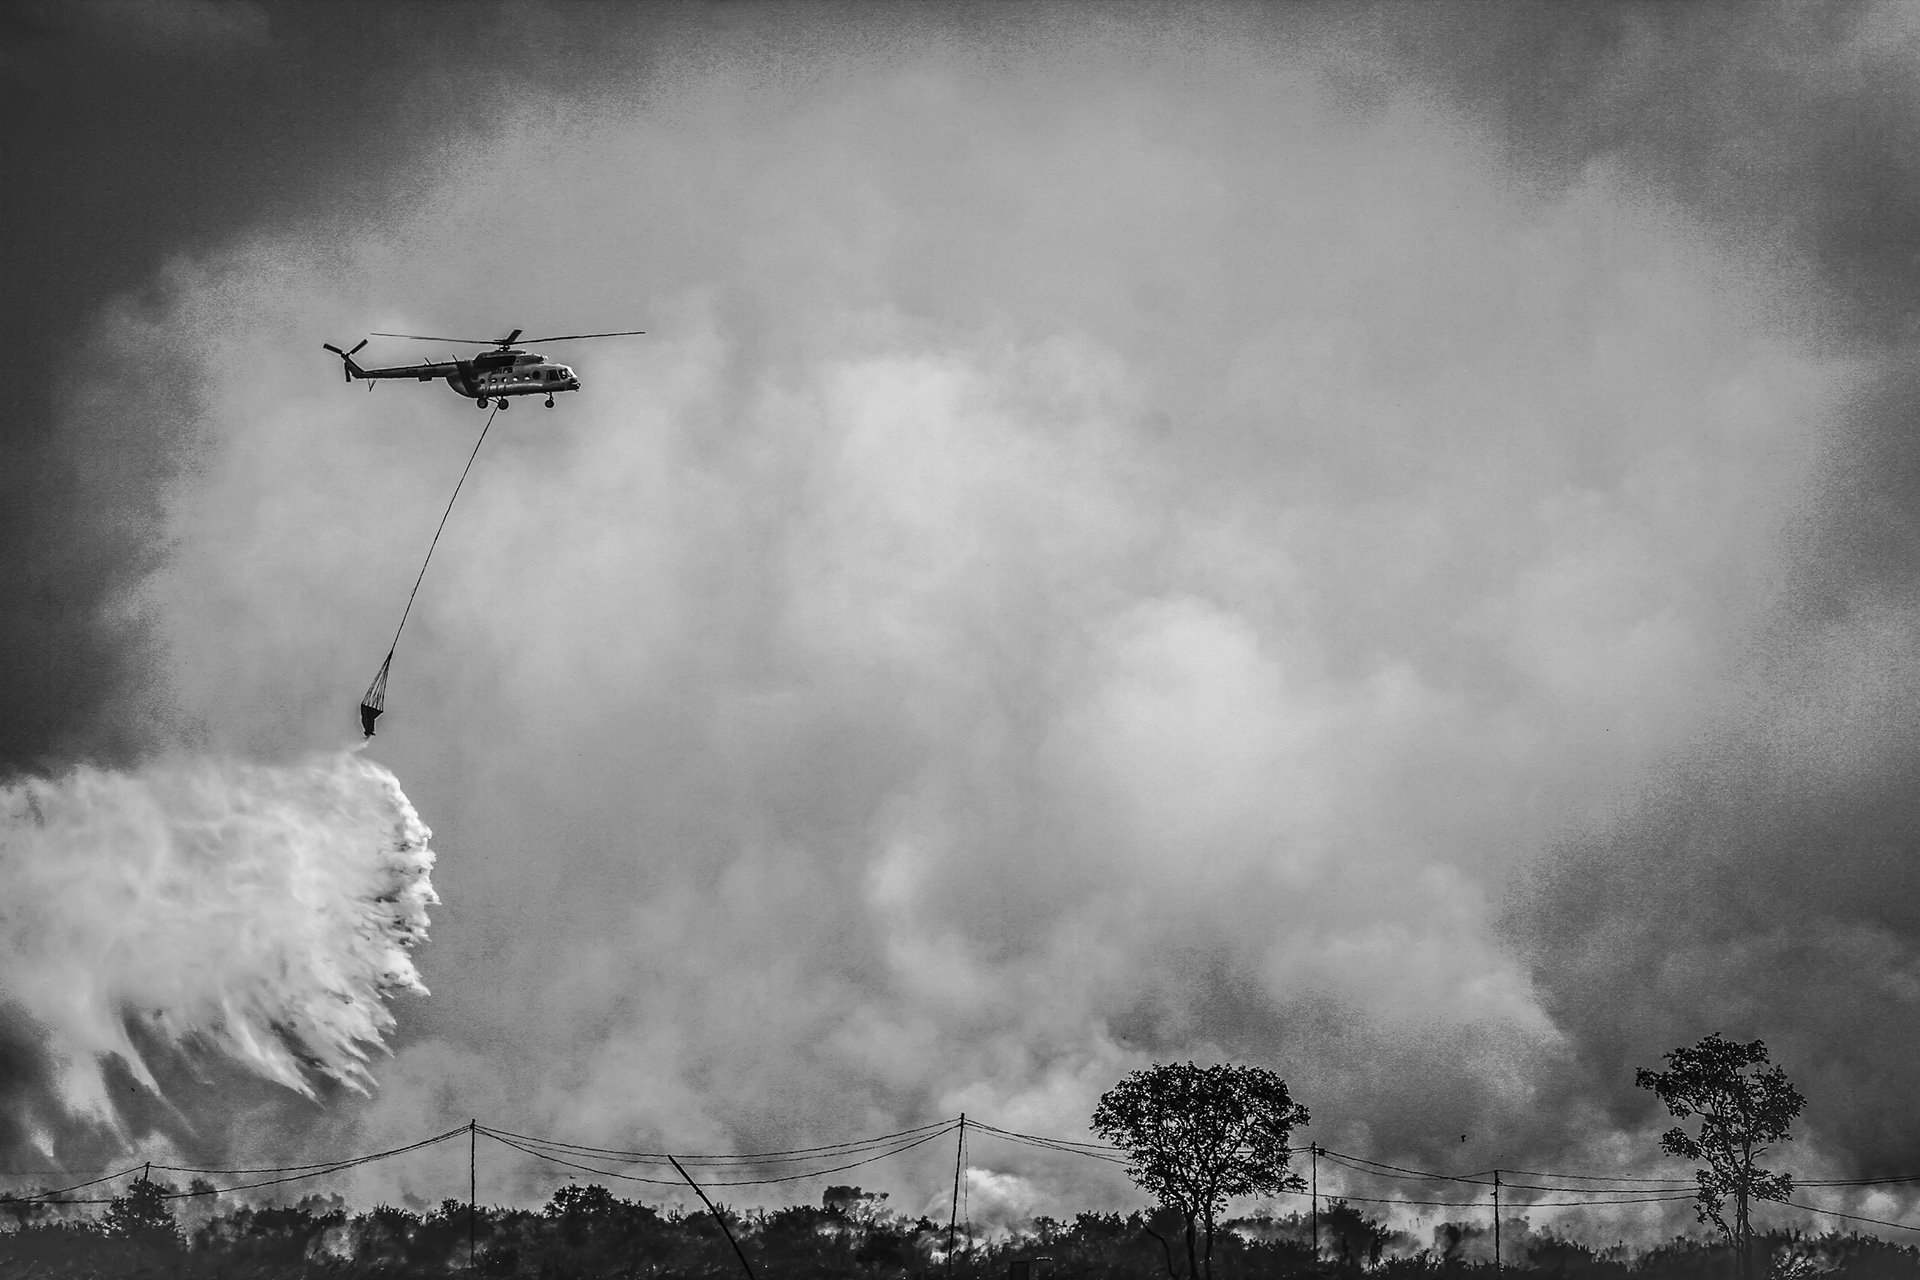 A helicopter releases water to extinguish a fire in a peatland forest in the Ogan Ilir district of South Sumatra, Indonesia.